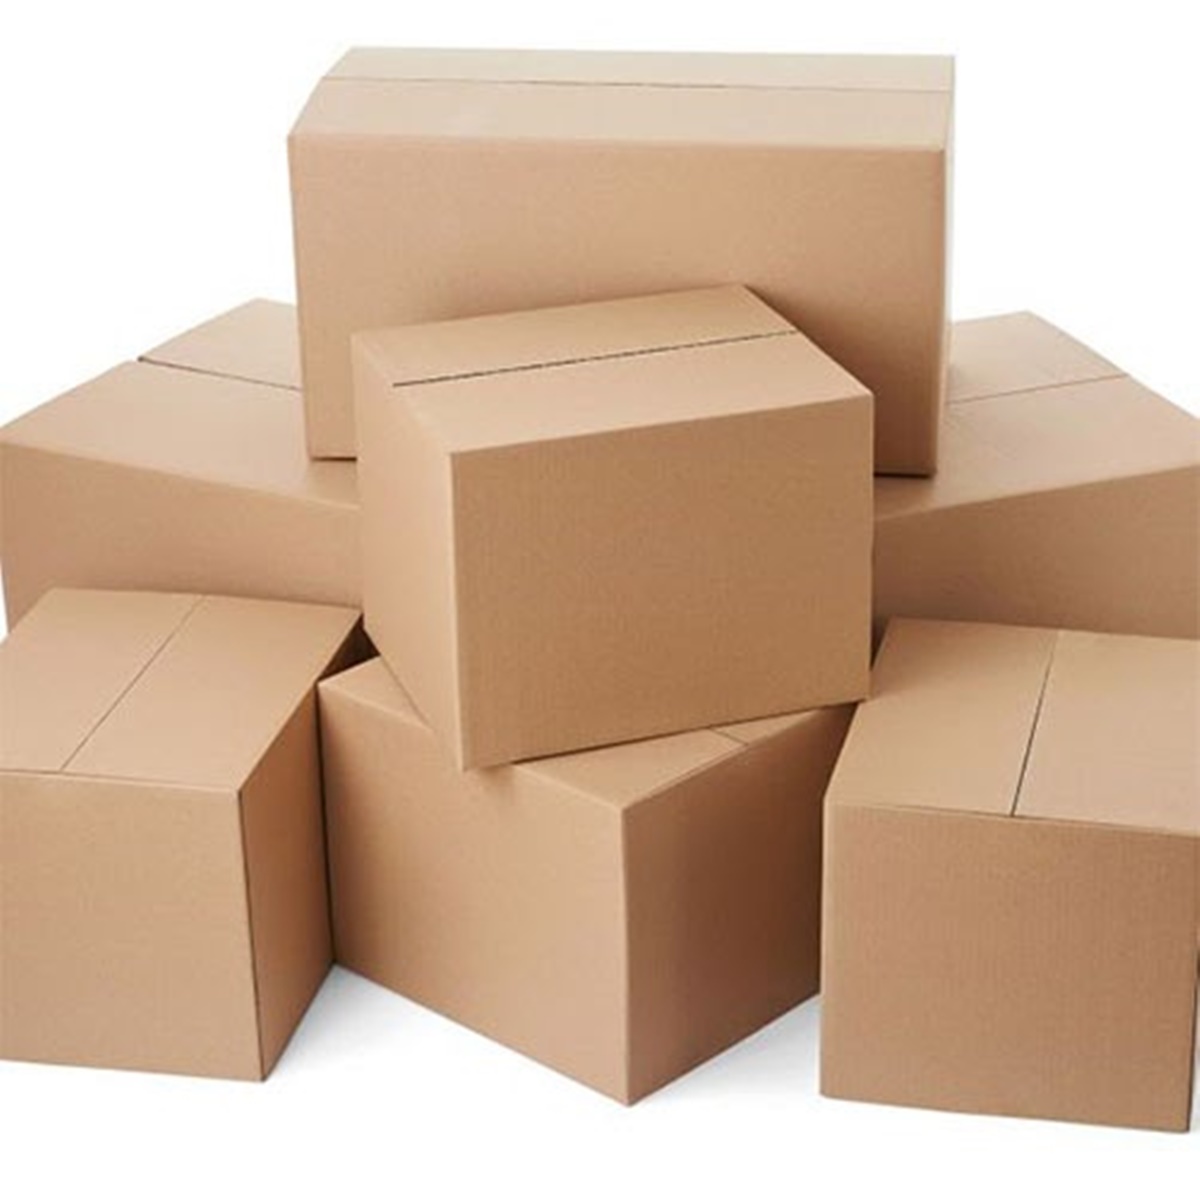 Cheapest Way to Ship a Big Box of Clothes: Cost-Saving Packaging Tips 101